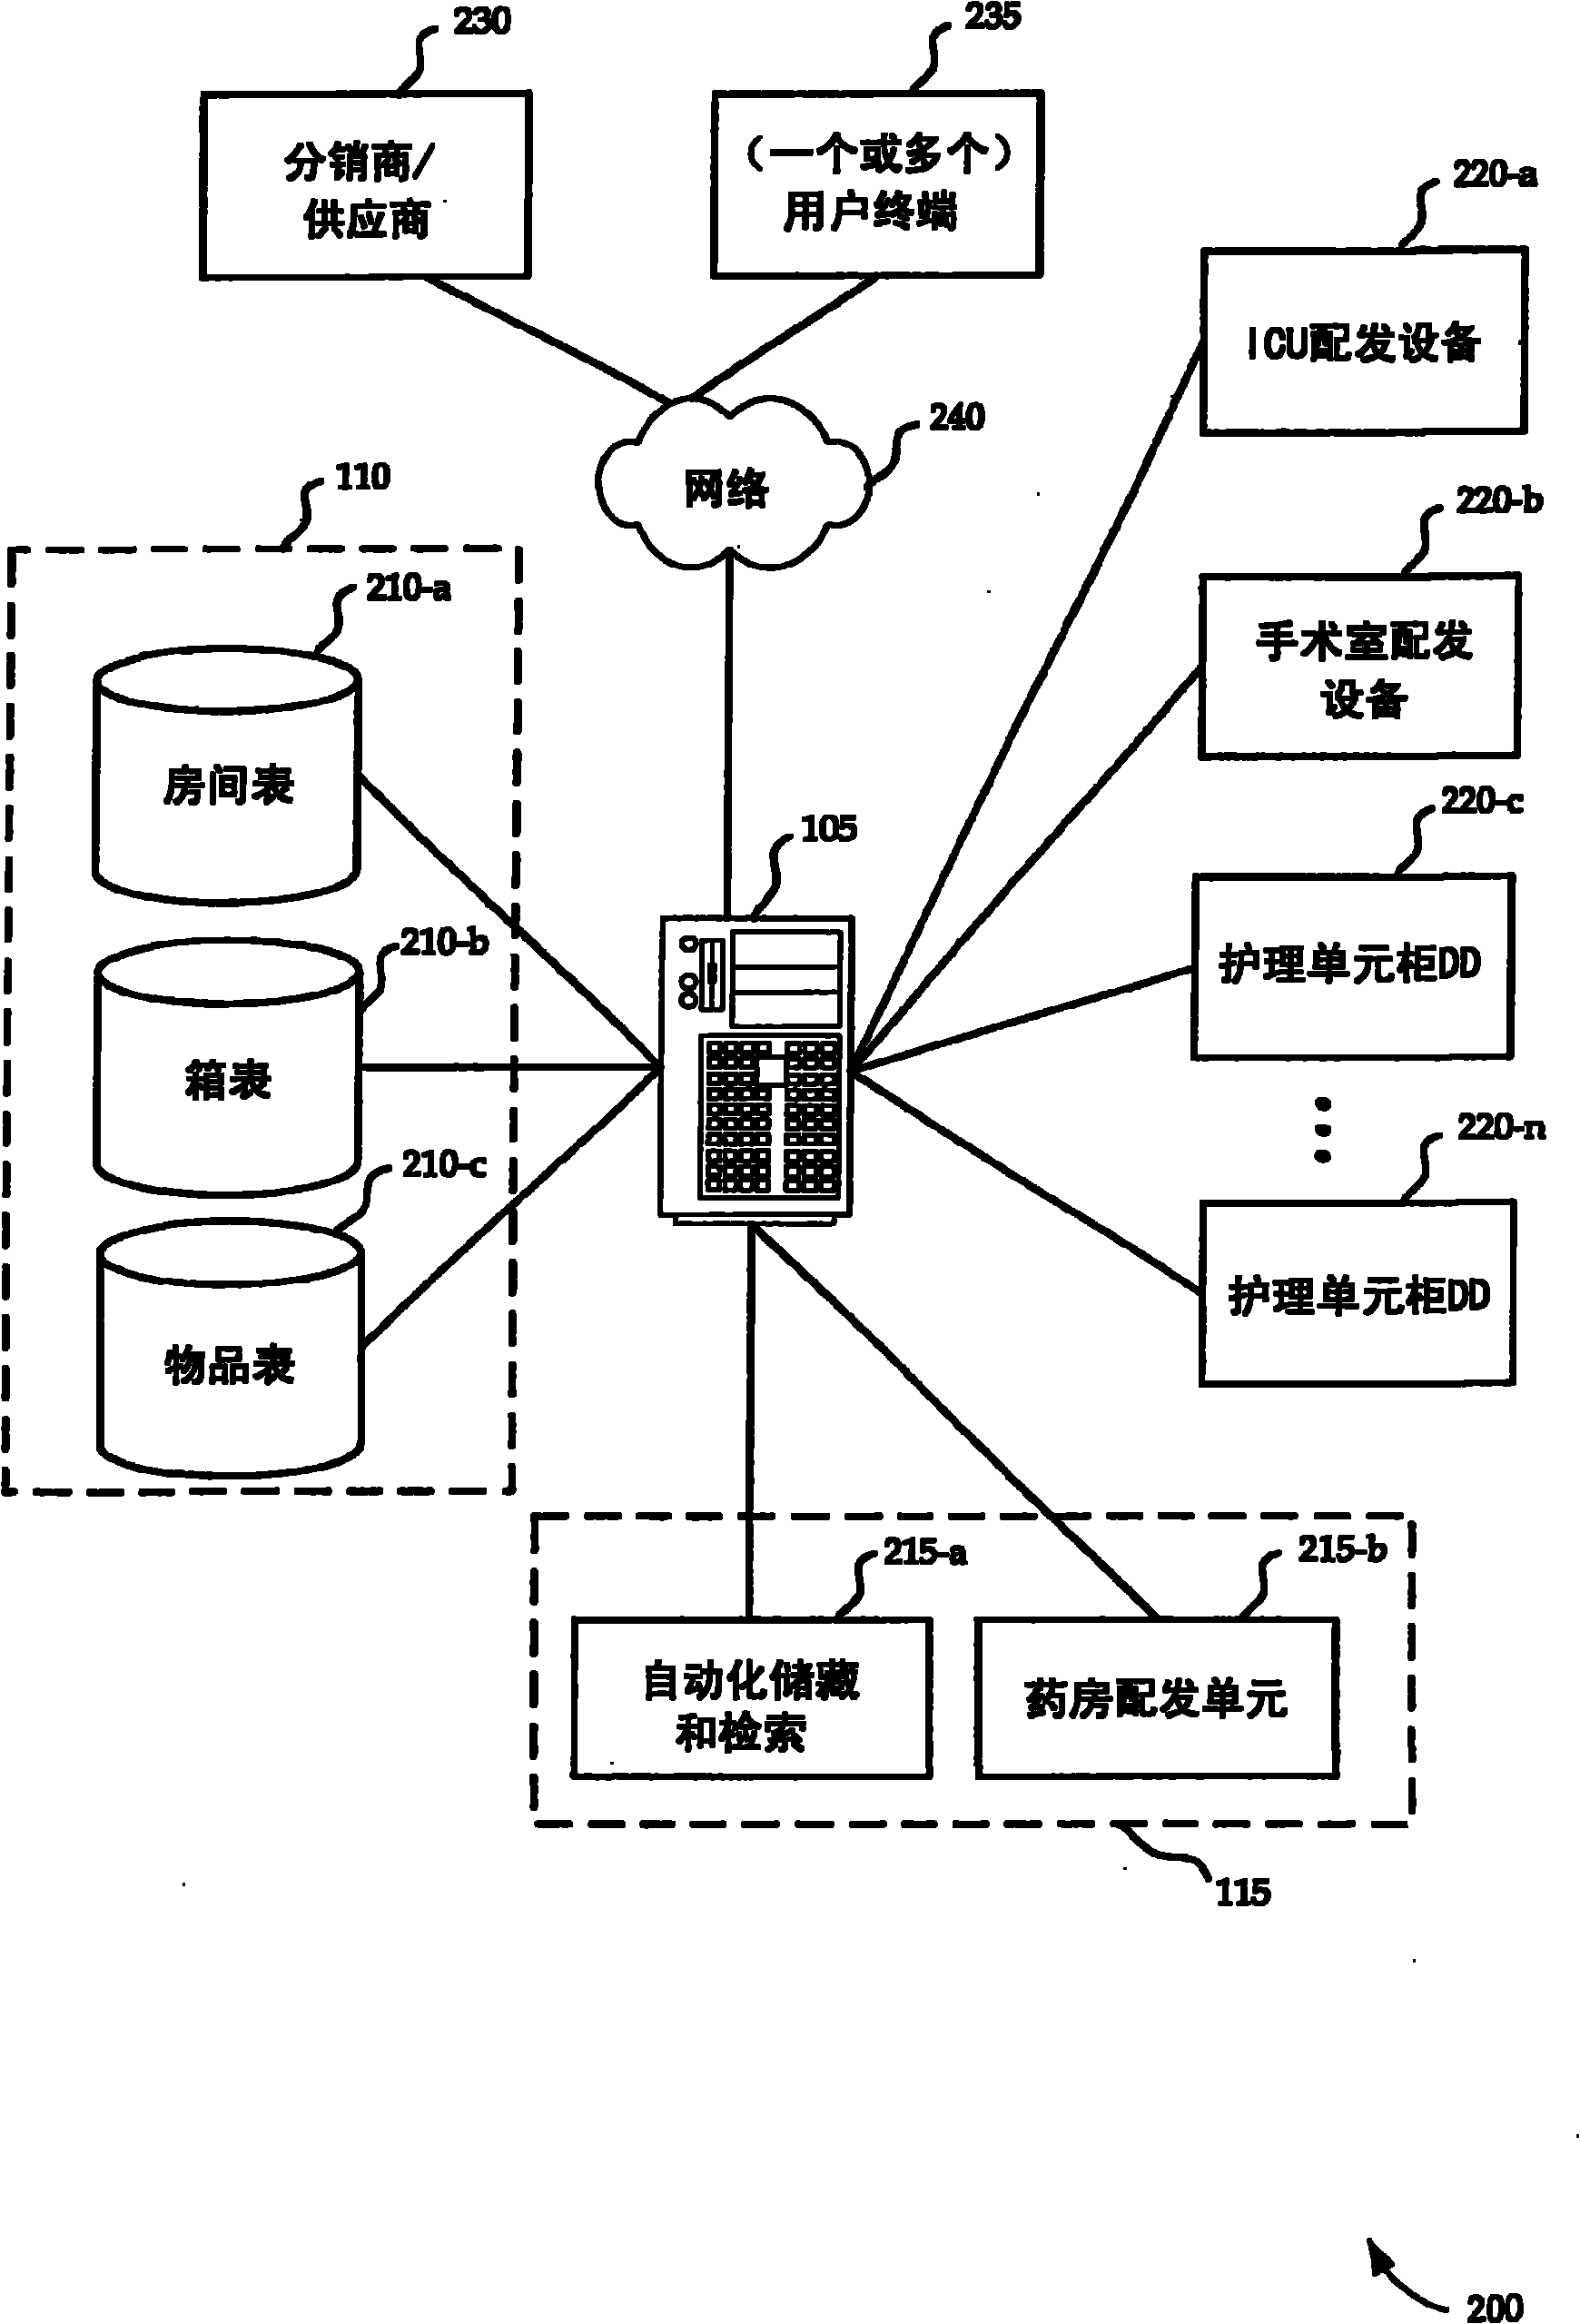 Patient-specific bin systems, methods and devices